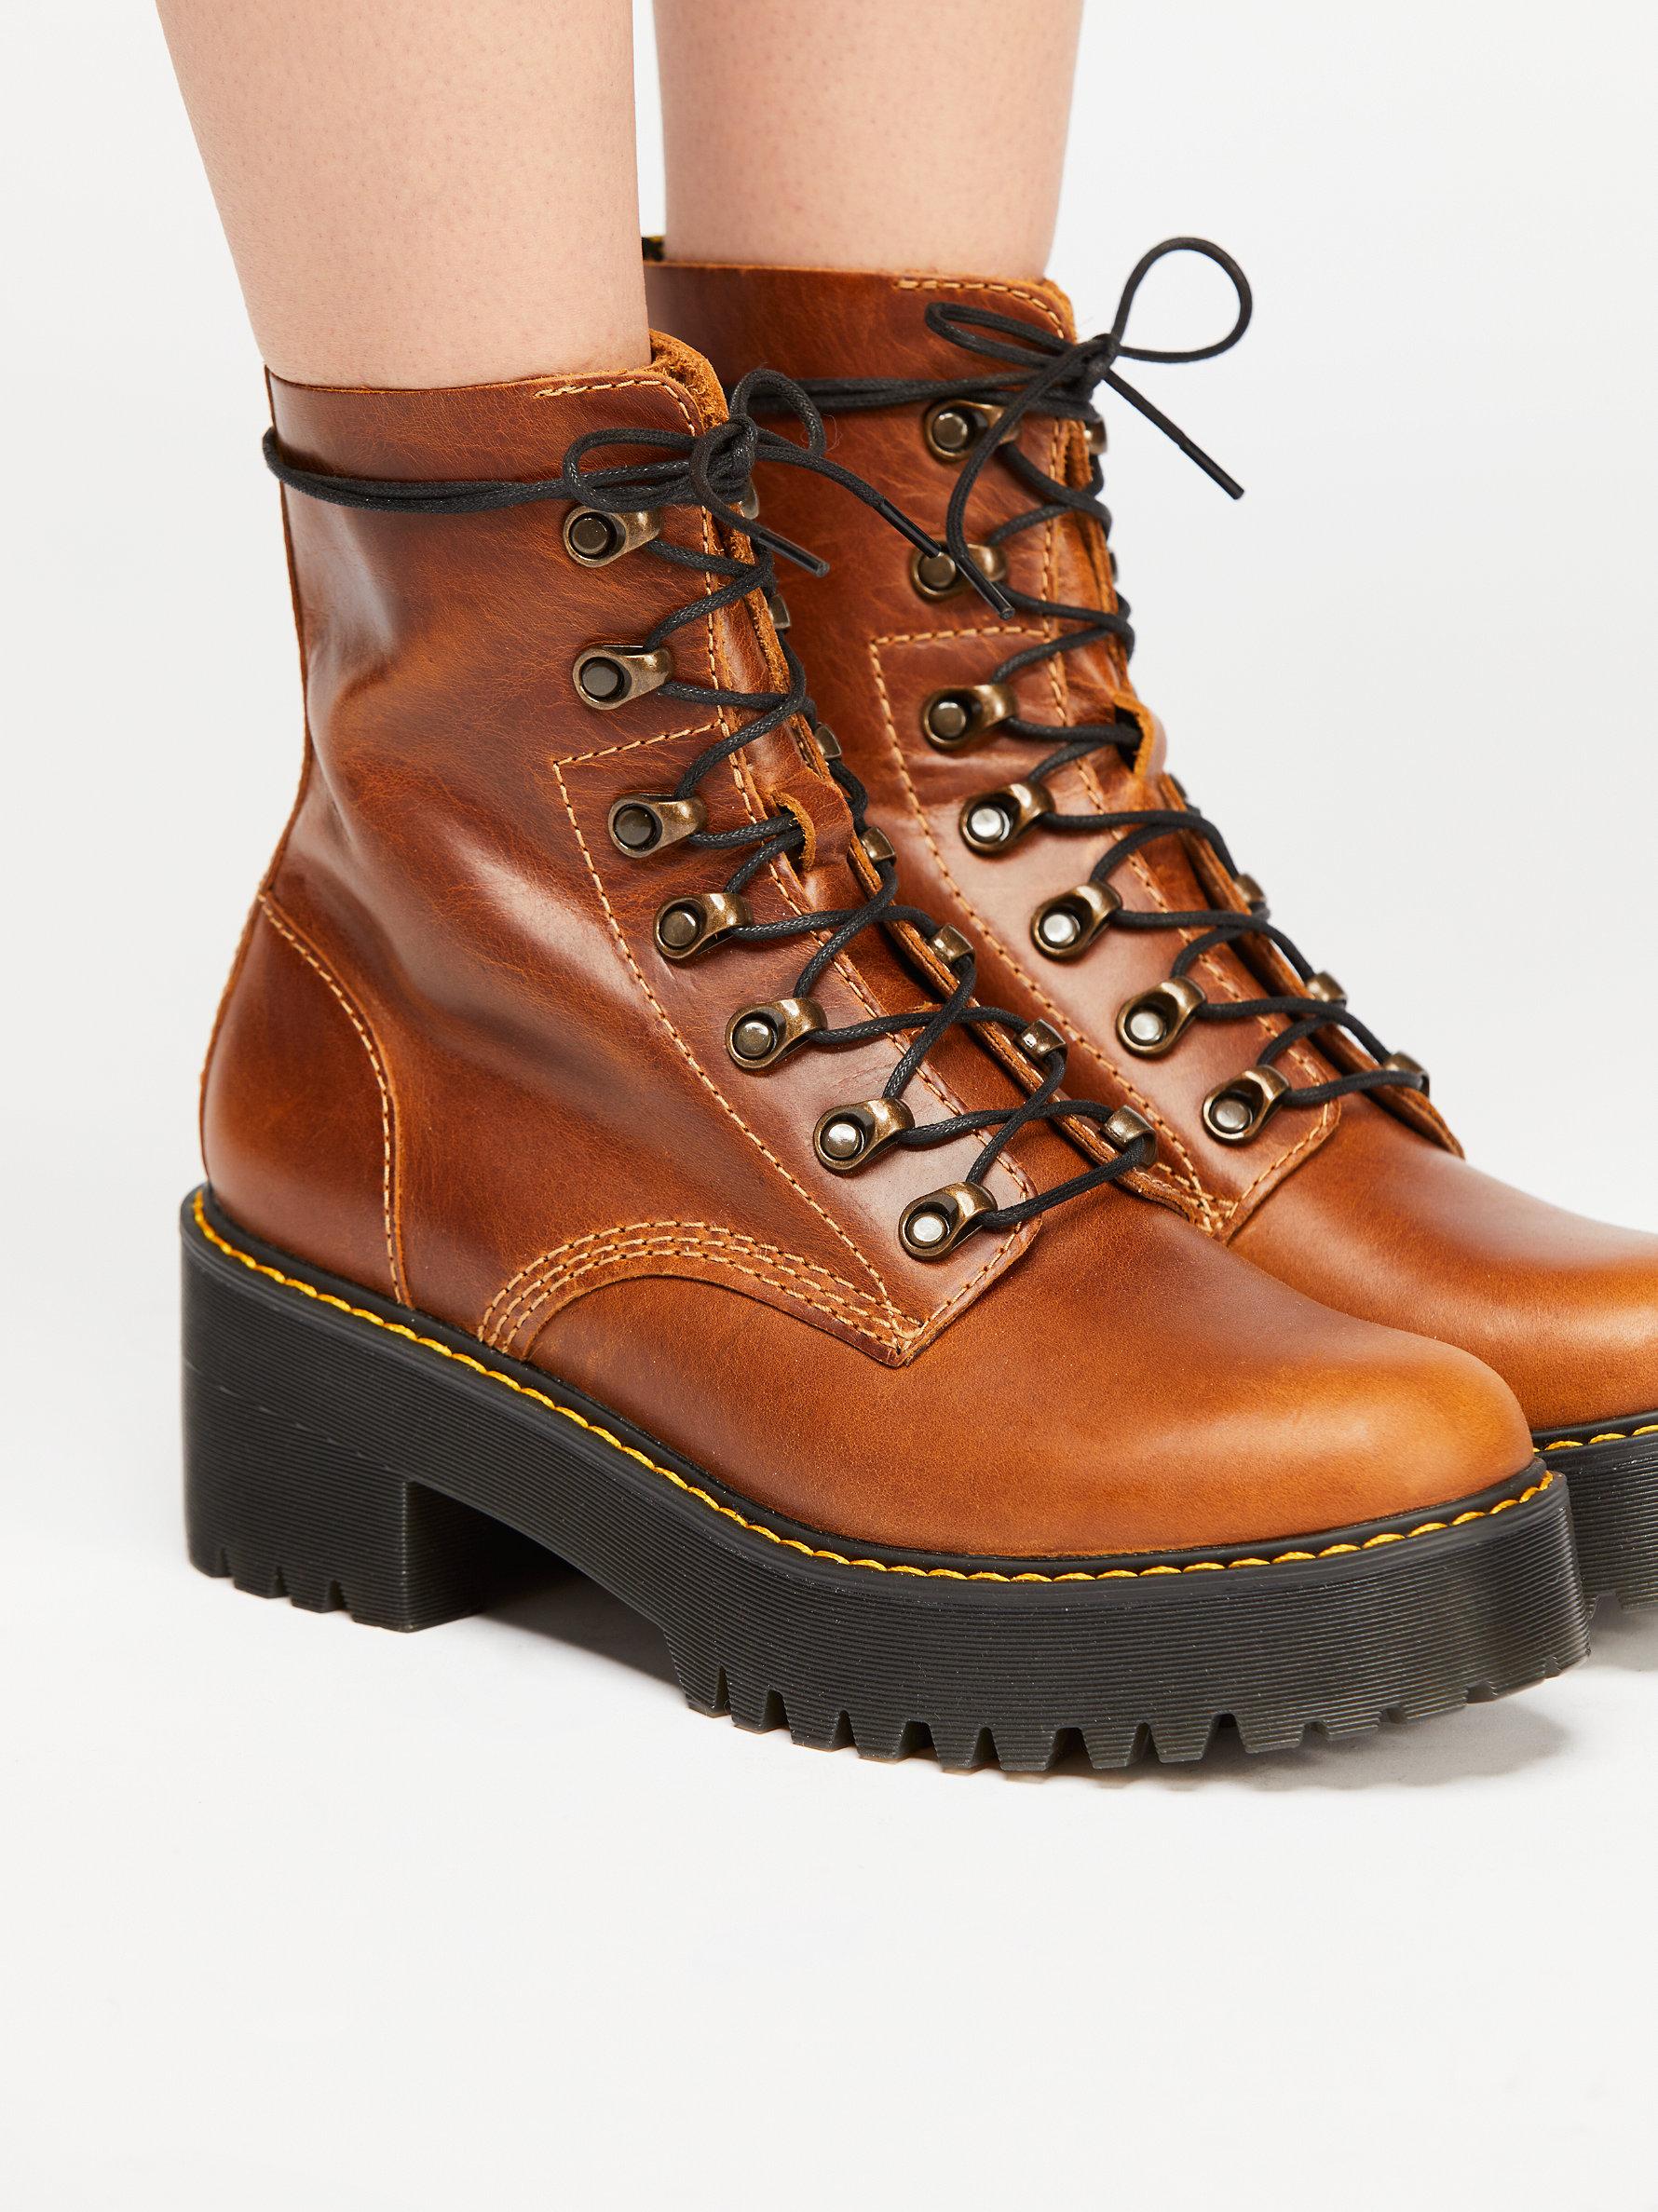 Free People Dr. Martens Leona Platform Ankle Boots in Brown | Lyst